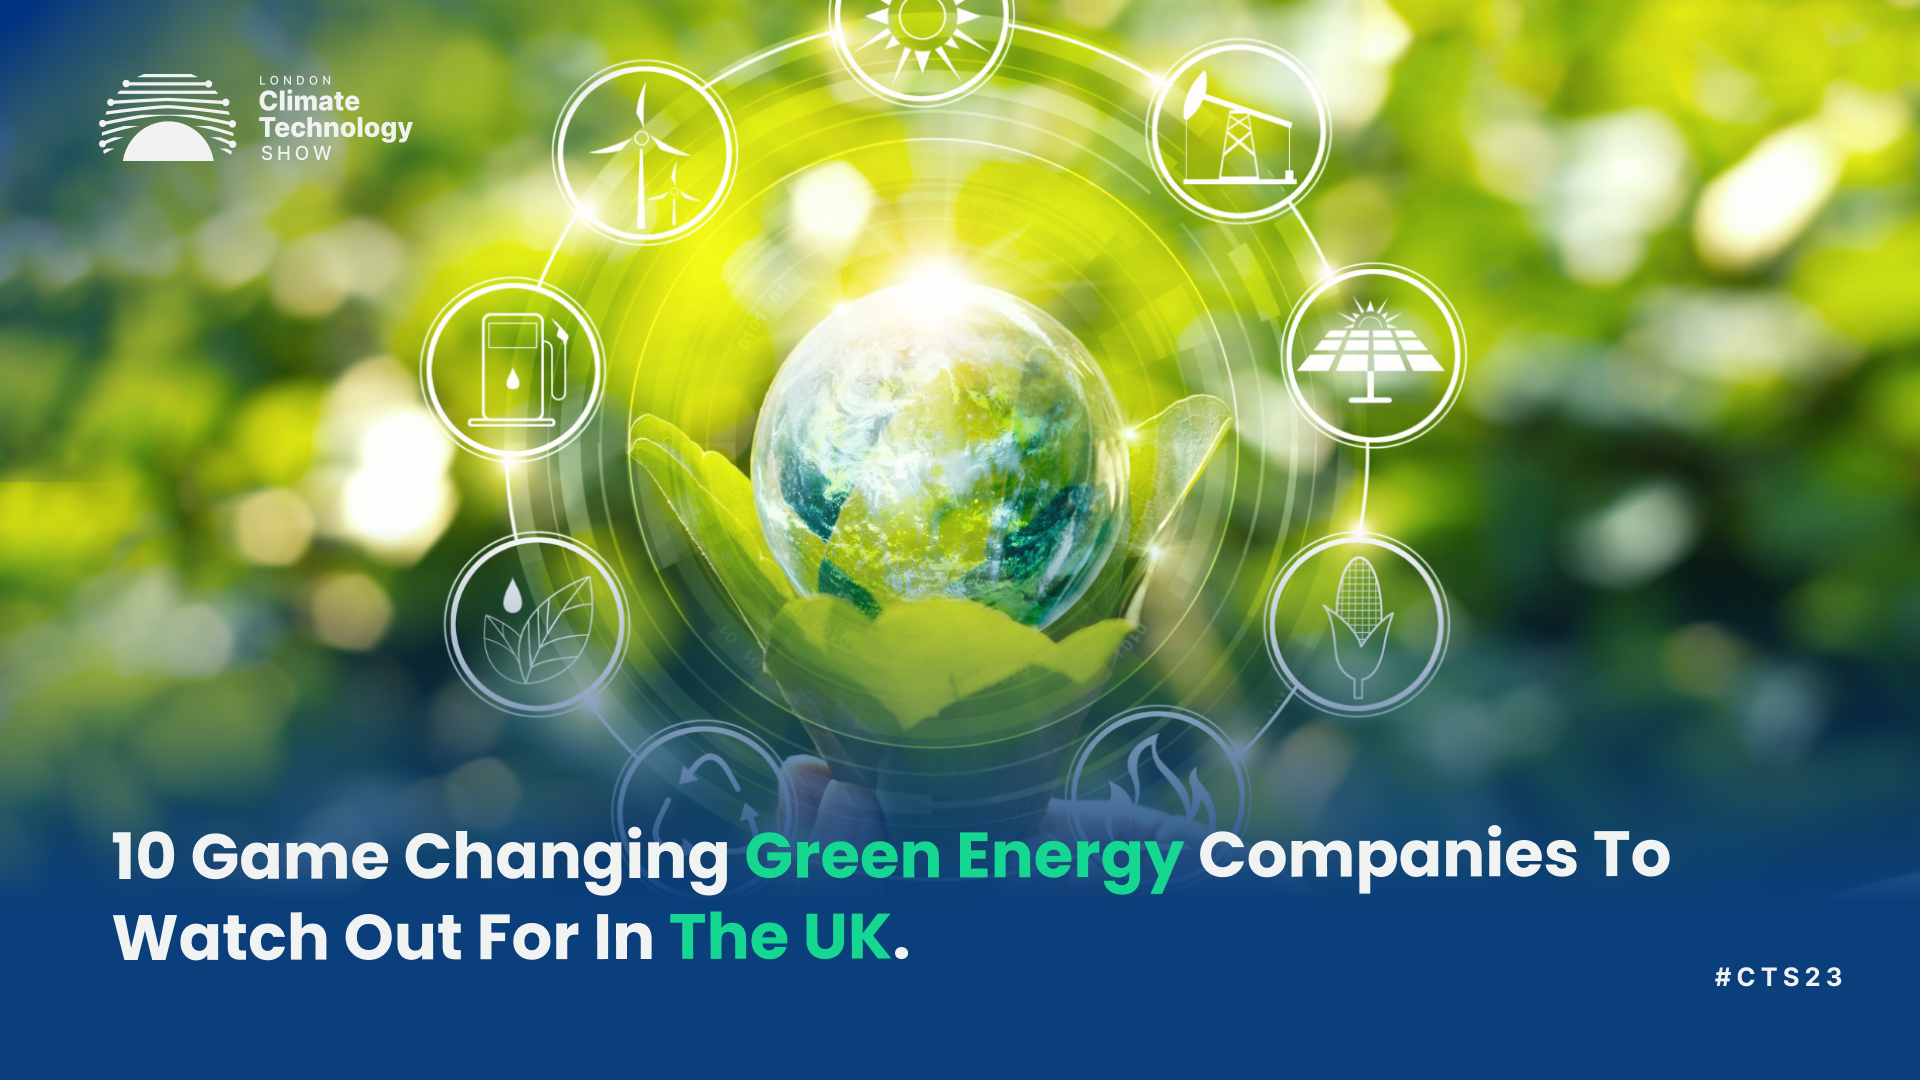 10 Game Changing Green Energy Companies To Watch Out For In The UK